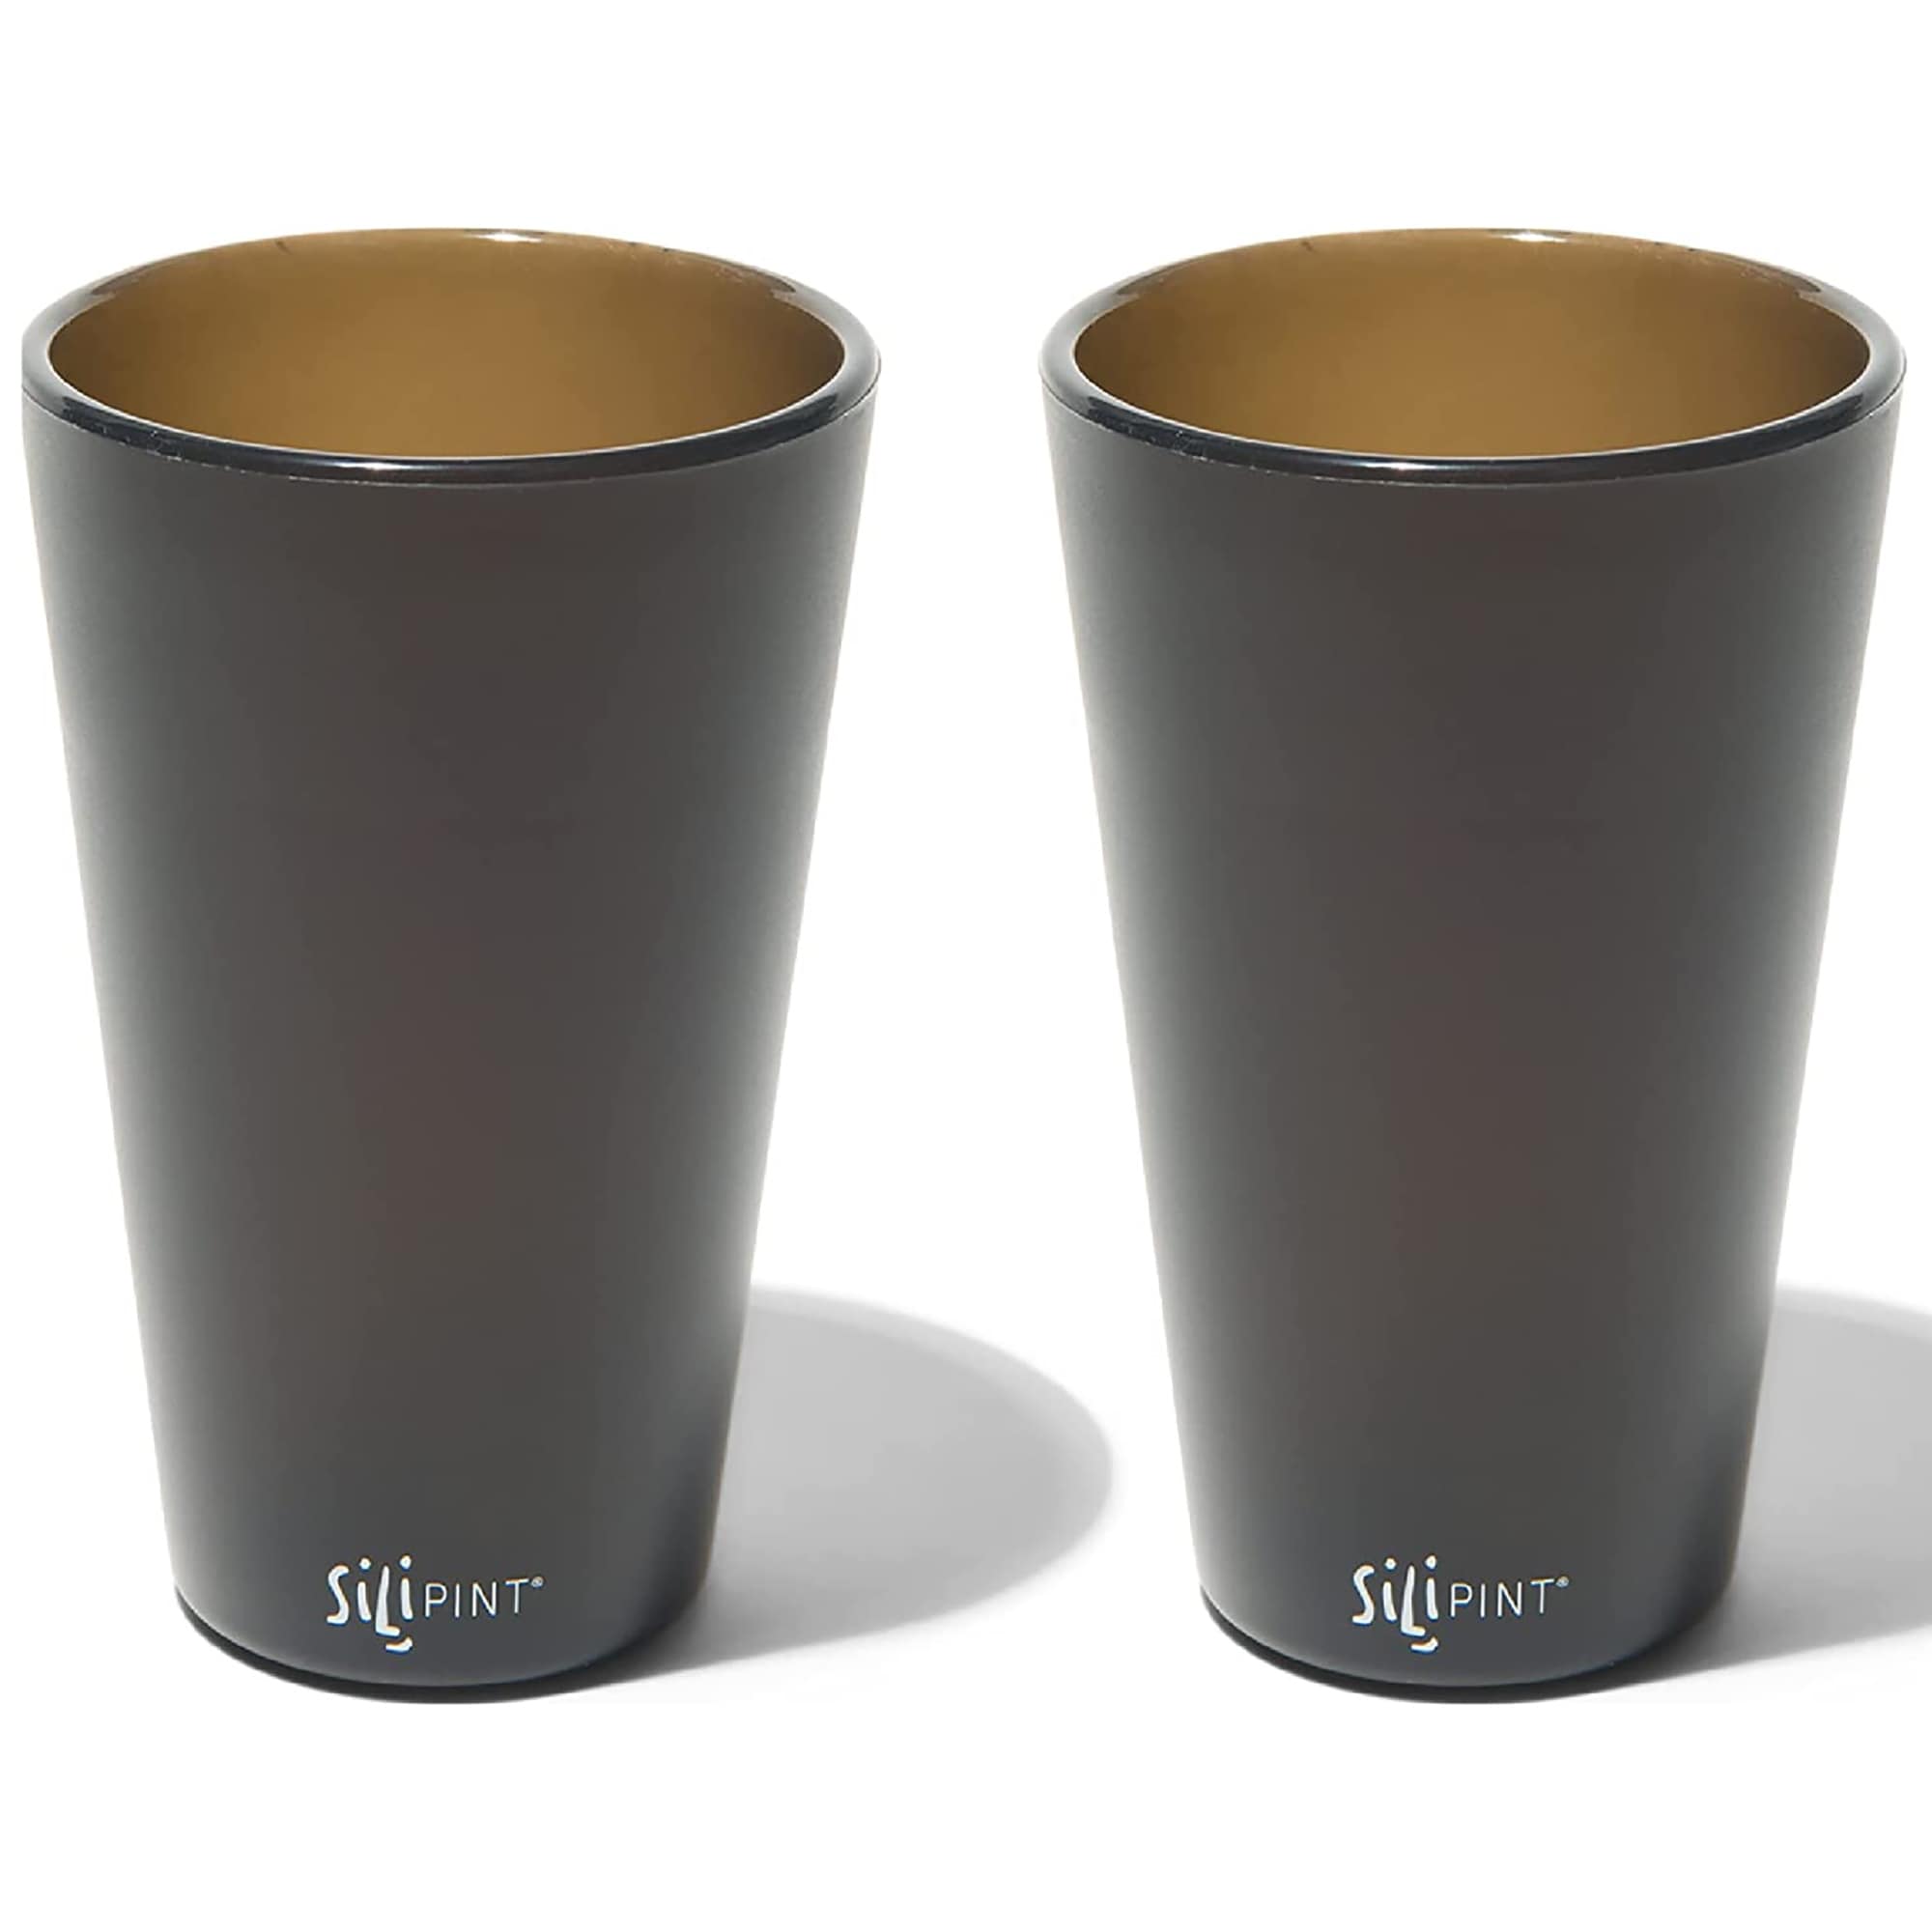 Flexi answers - What is the equivalent of 2 pints in cups?